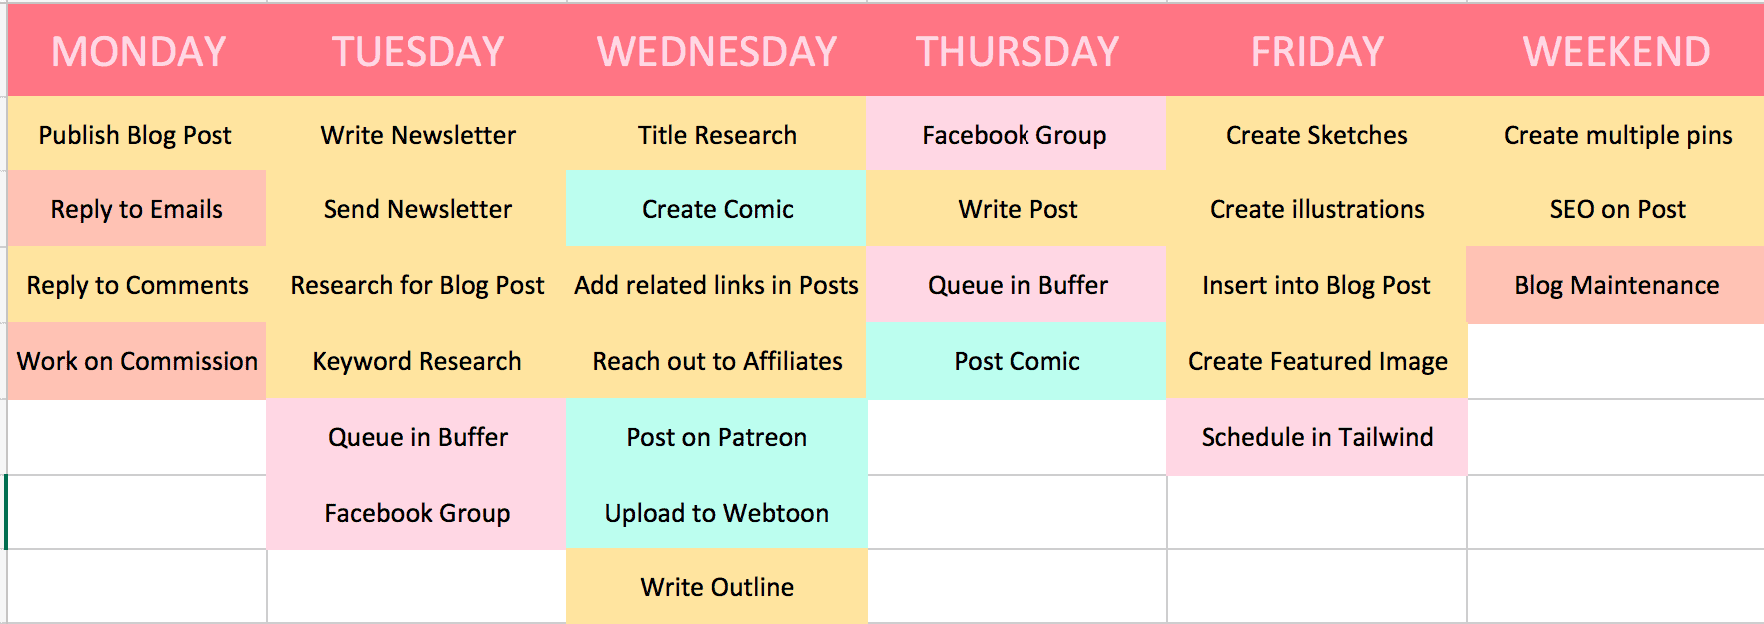 If you use Excel, you can create a posting schedule and a blog content strategy with that. 